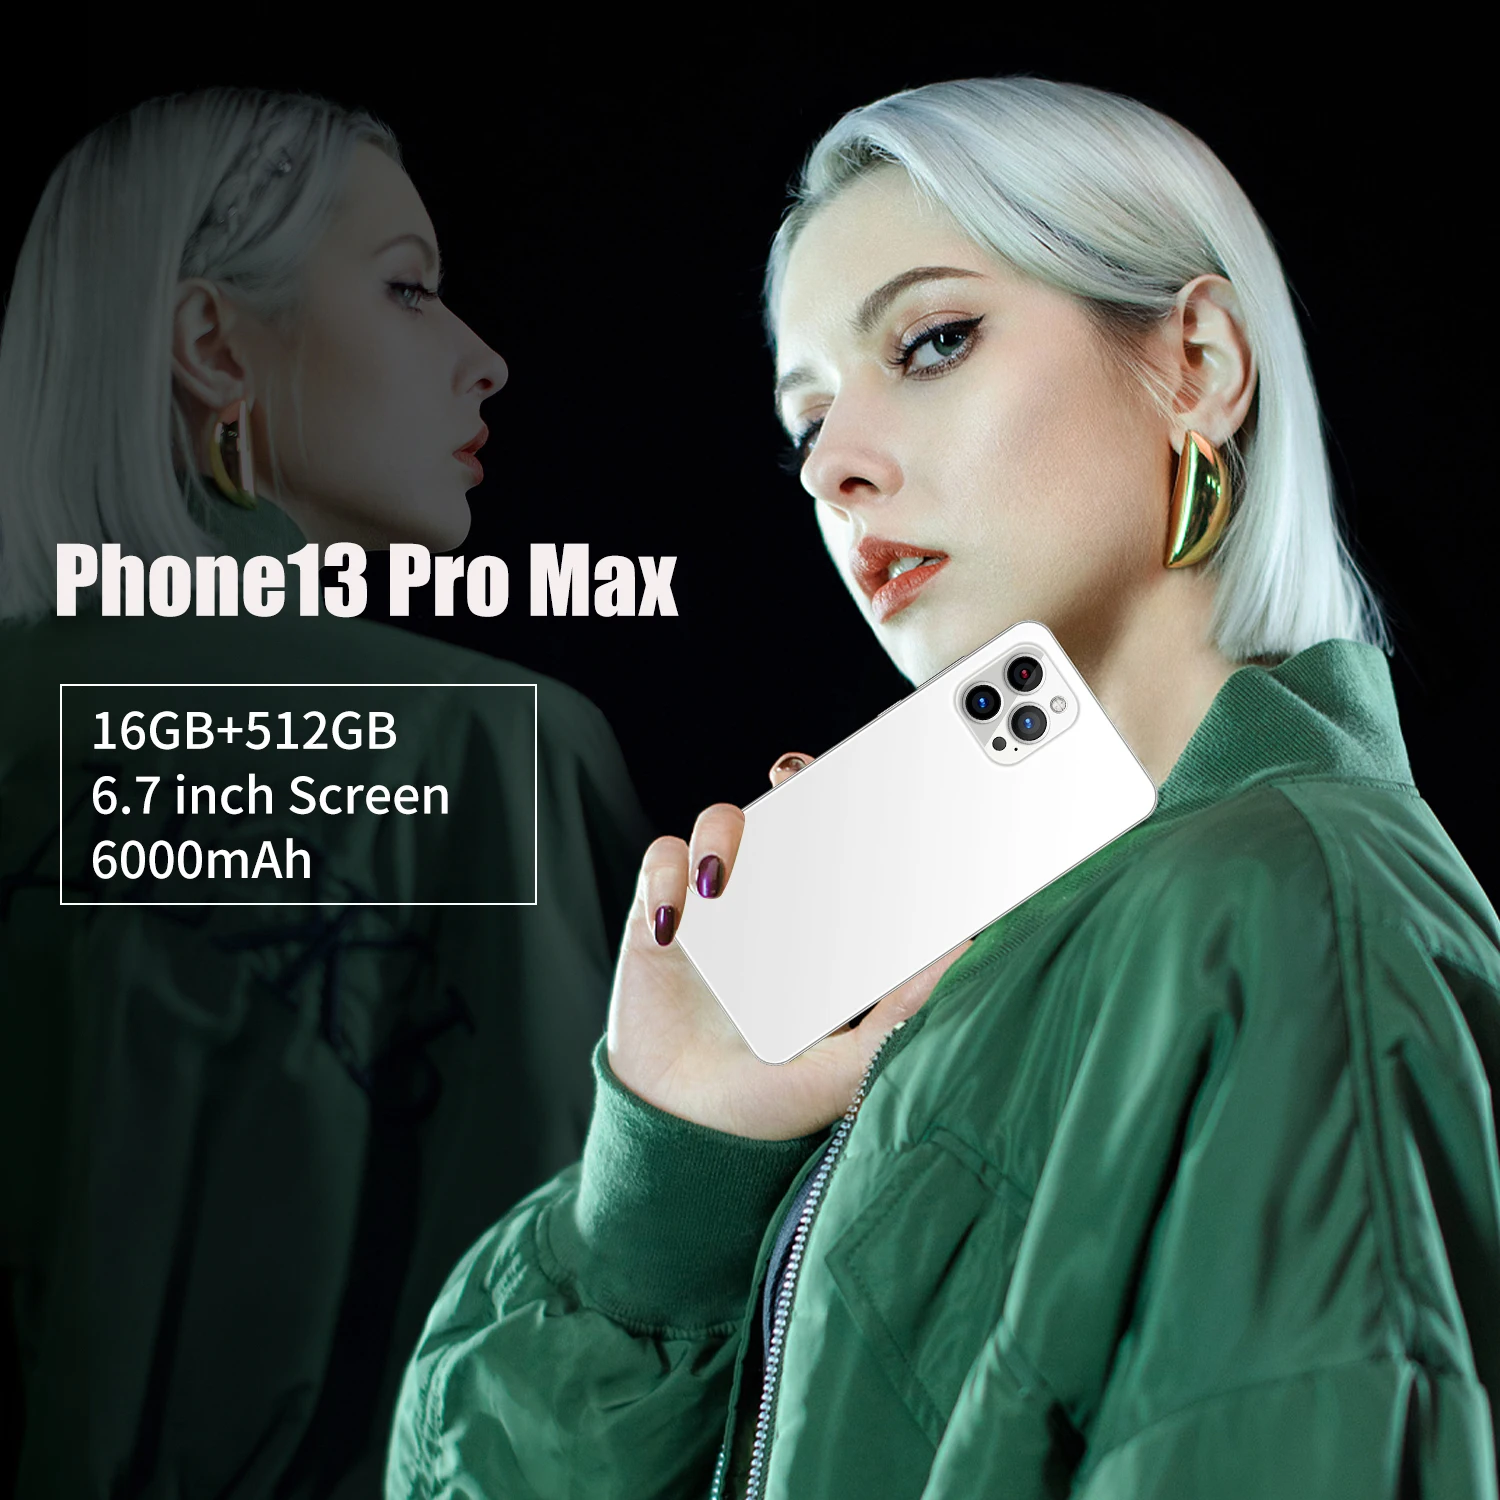 2022 new cellphone 6 7 inch u screen 5g smartphone 12gb512gb apple iphone 13 pro max mobilephon samsung huawei mobile phone free global shipping